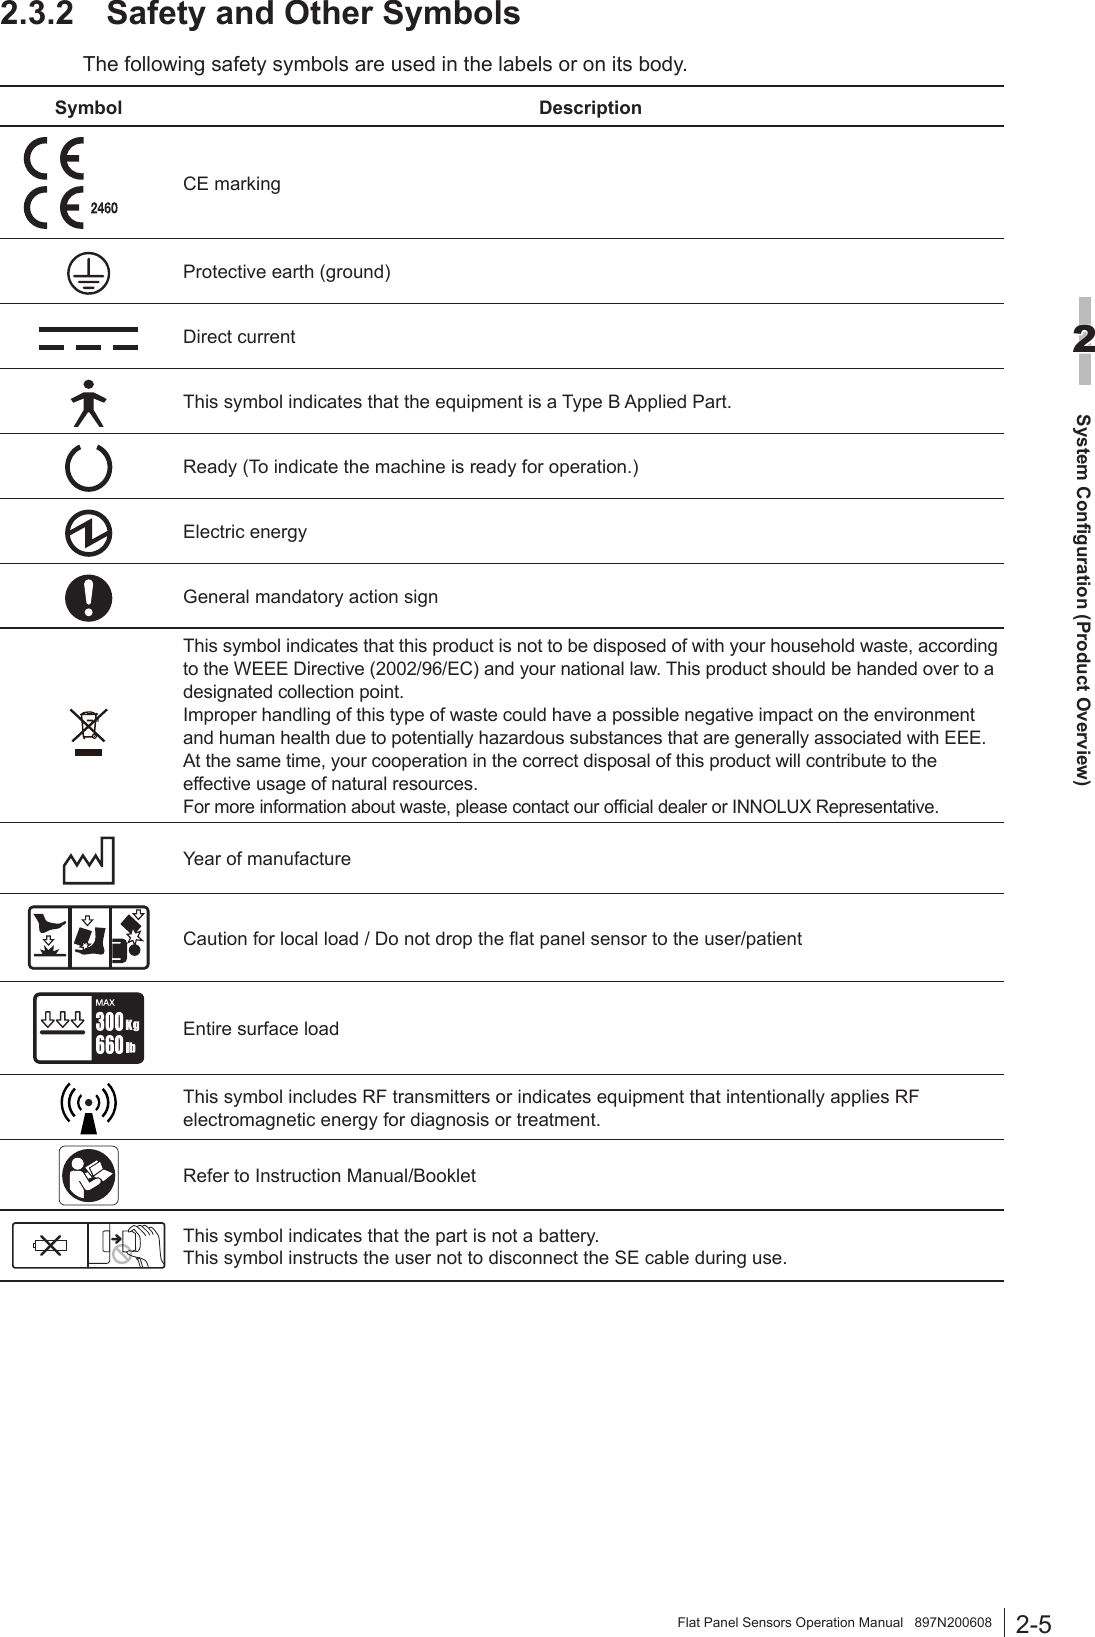 2-5System Configuration (Product Overview)2Flat Panel Sensors Operation Manual   897N2006082.3.2  Safety and Other SymbolsThe following safety symbols are used in the labels or on its body.Symbol DescriptionCE markingProtective earth (ground)Direct currentThis symbol indicates that the equipment is a Type B Applied Part.Ready (To indicate the machine is ready for operation.)Electric energyGeneral mandatory action signThis symbol indicates that this product is not to be disposed of with your household waste, according to the WEEE Directive (2002/96/EC) and your national law. This product should be handed over to a designated collection point.Improper handling of this type of waste could have a possible negative impact on the environment and human health due to potentially hazardous substances that are generally associated with EEE.At the same time, your cooperation in the correct disposal of this product will contribute to the effective usage of natural resources.For more information about waste, please contact our ofcial dealer or INNOLUX Representative.Year of manufactureCaution for local load / Do not drop the at panel sensor to the user/patientEntire surface load This symbol includes RF transmitters or indicates equipment that intentionally applies RF electromagnetic energy for diagnosis or treatment.Refer to Instruction Manual/BookletThis symbol indicates that the part is not a battery.This symbol instructs the user not to disconnect the SE cable during use.